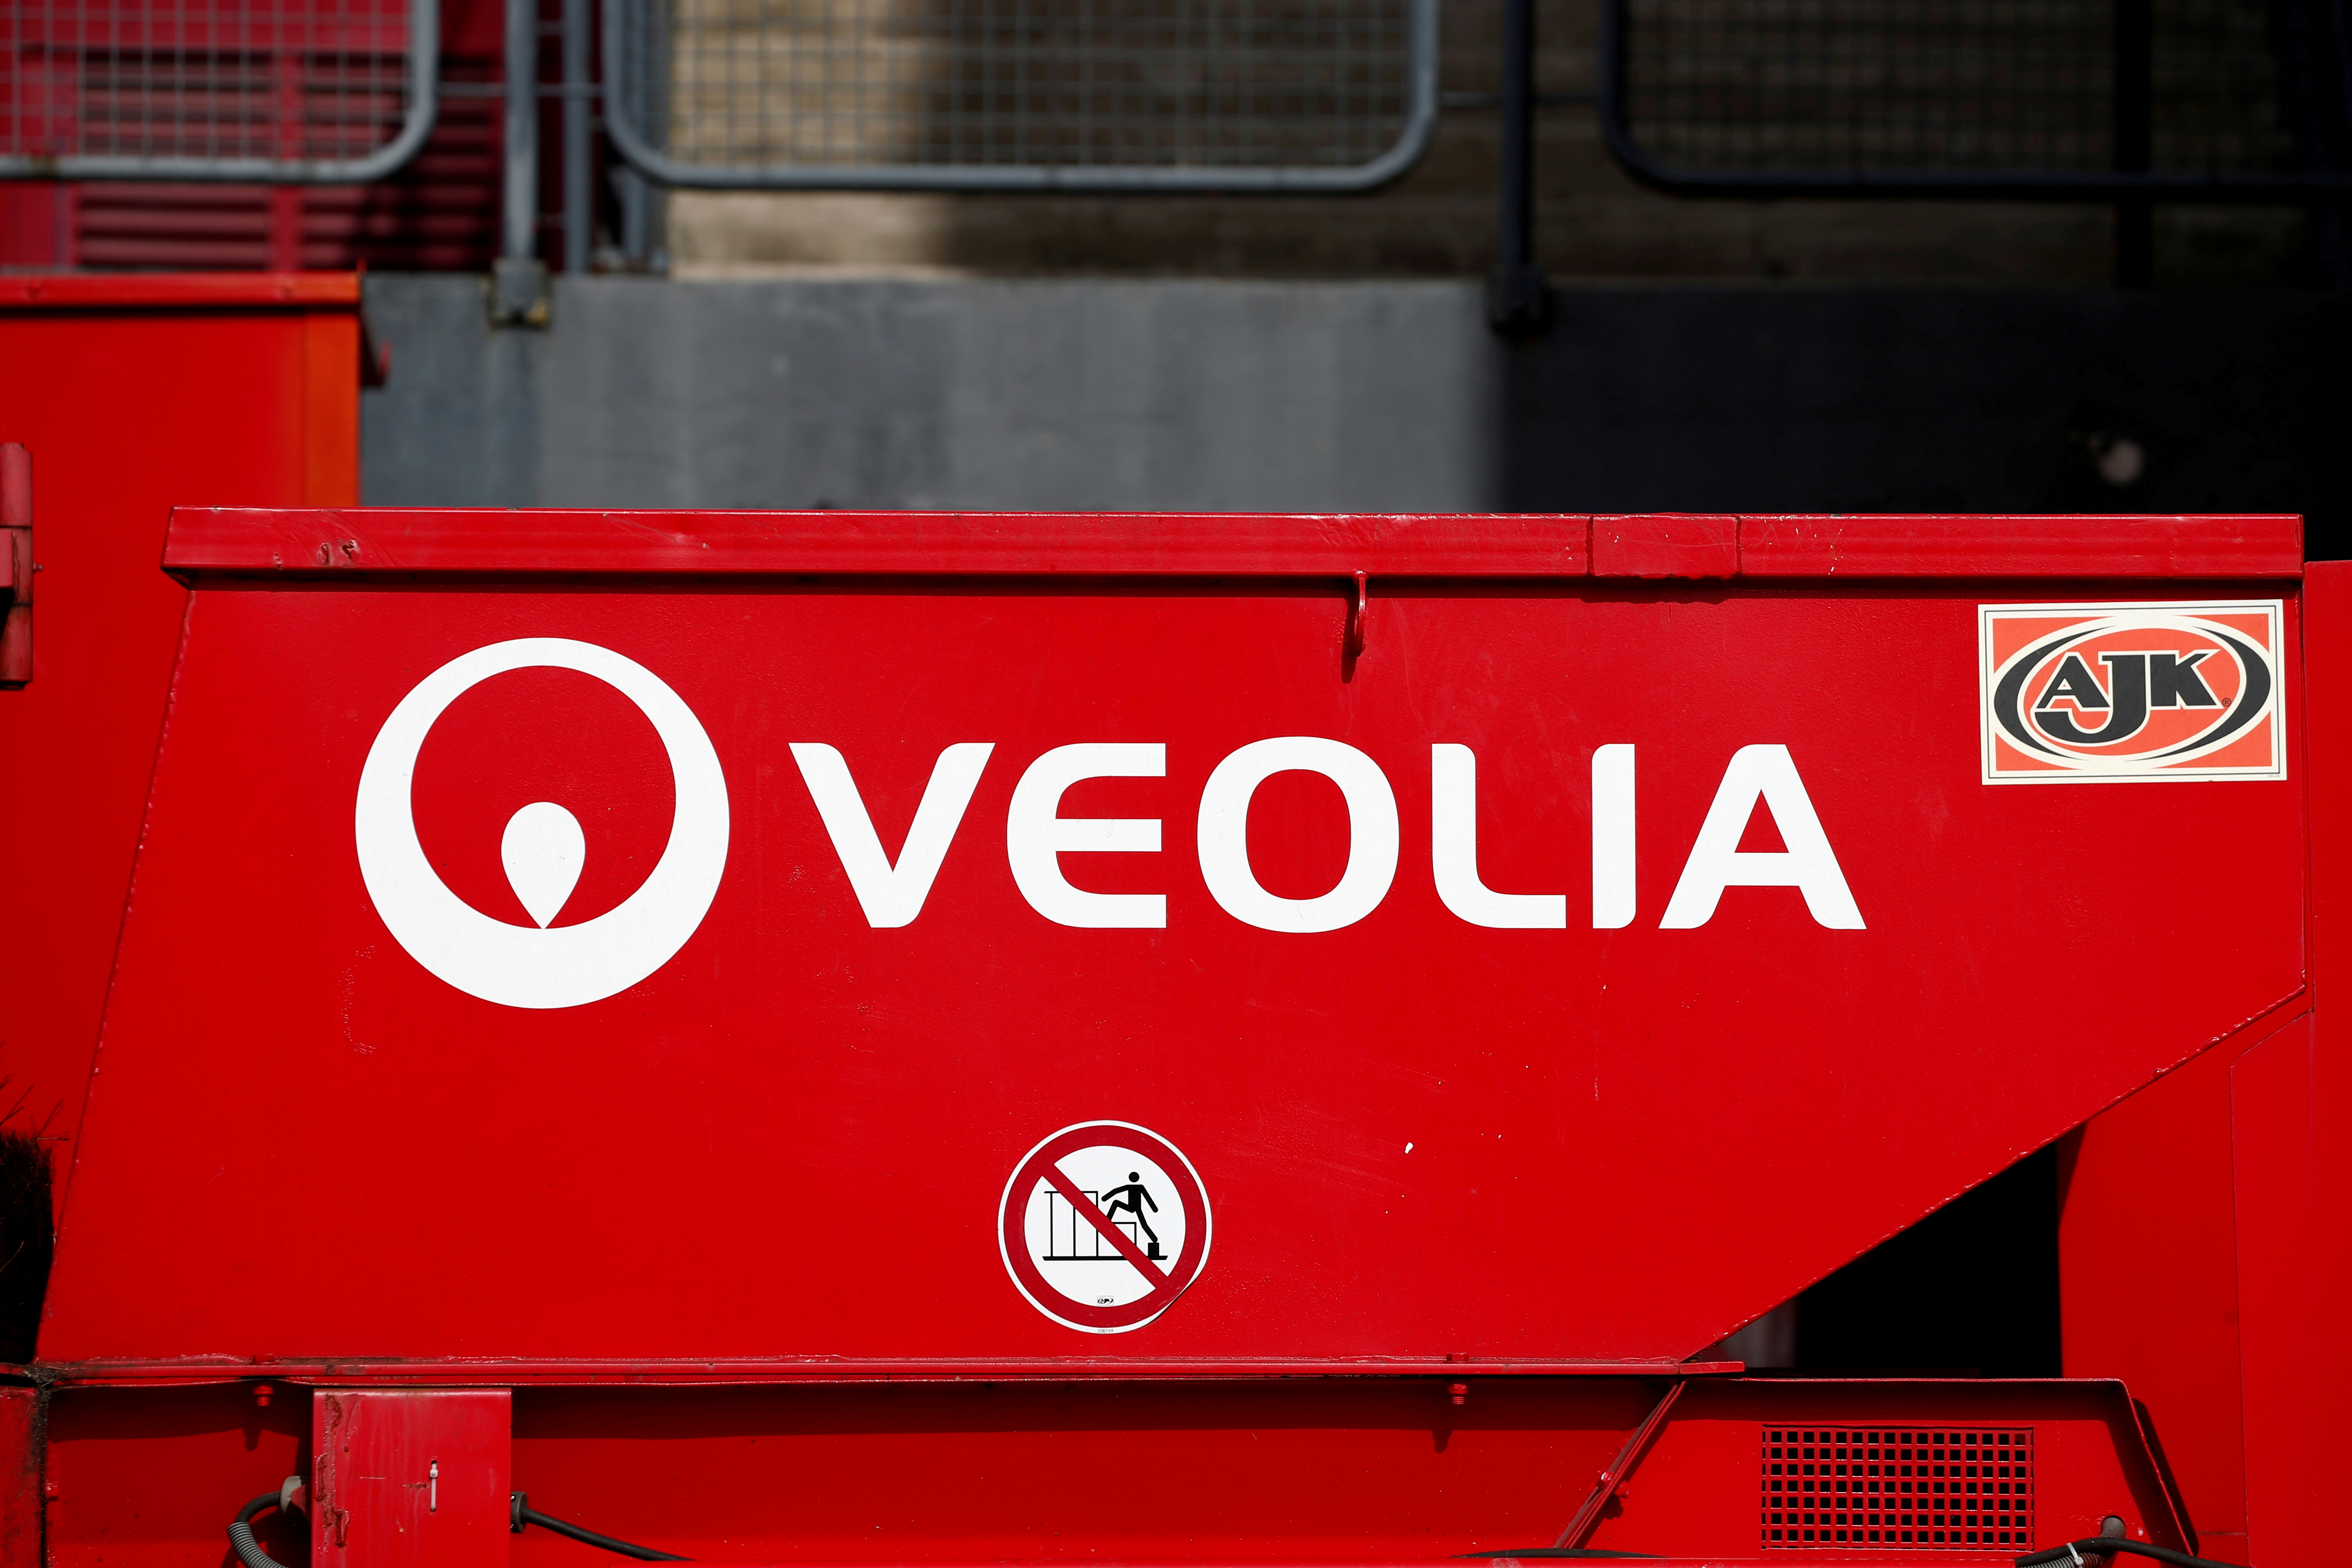 The logo of Veolia Environnement is seen on a waste compactor in Velizy-Villacoublay